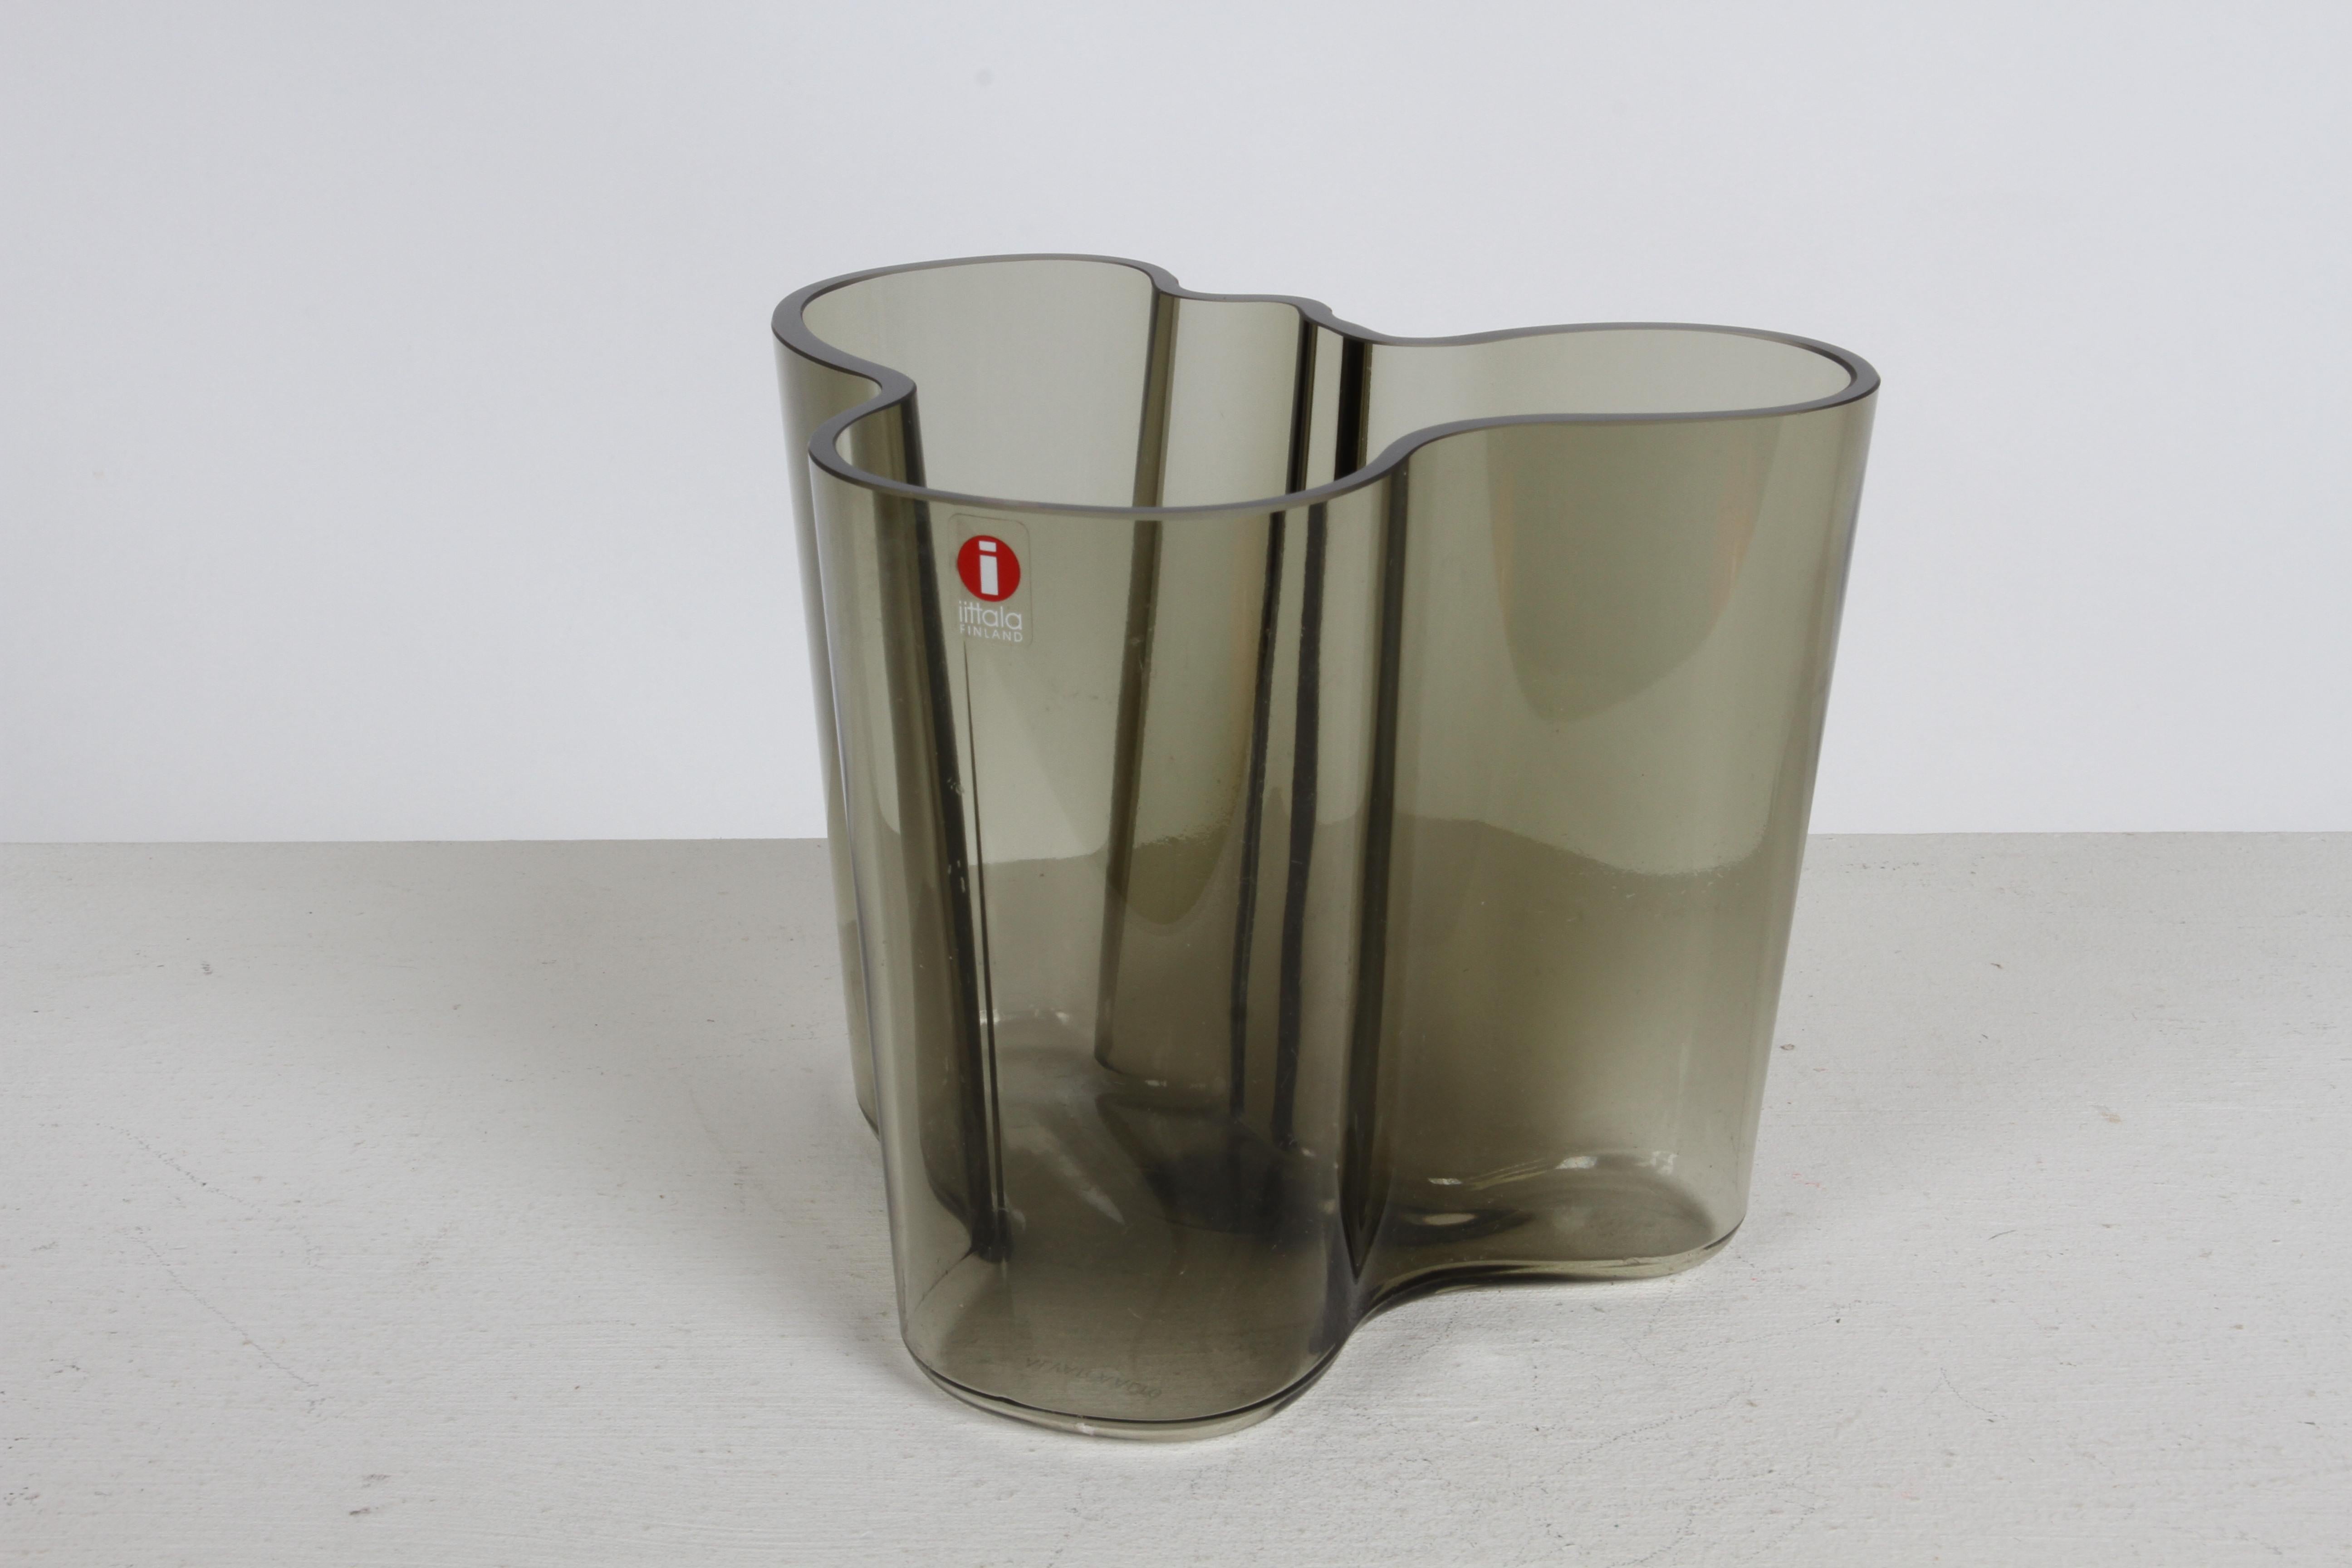 The famous Mid-Century Alvar Aalto Savoy Vase 3030 shown in rarely seen Smoke Gray glass made by Iittala Finland. Retains original label, also etched Alvar Aalto signature to bottom. 